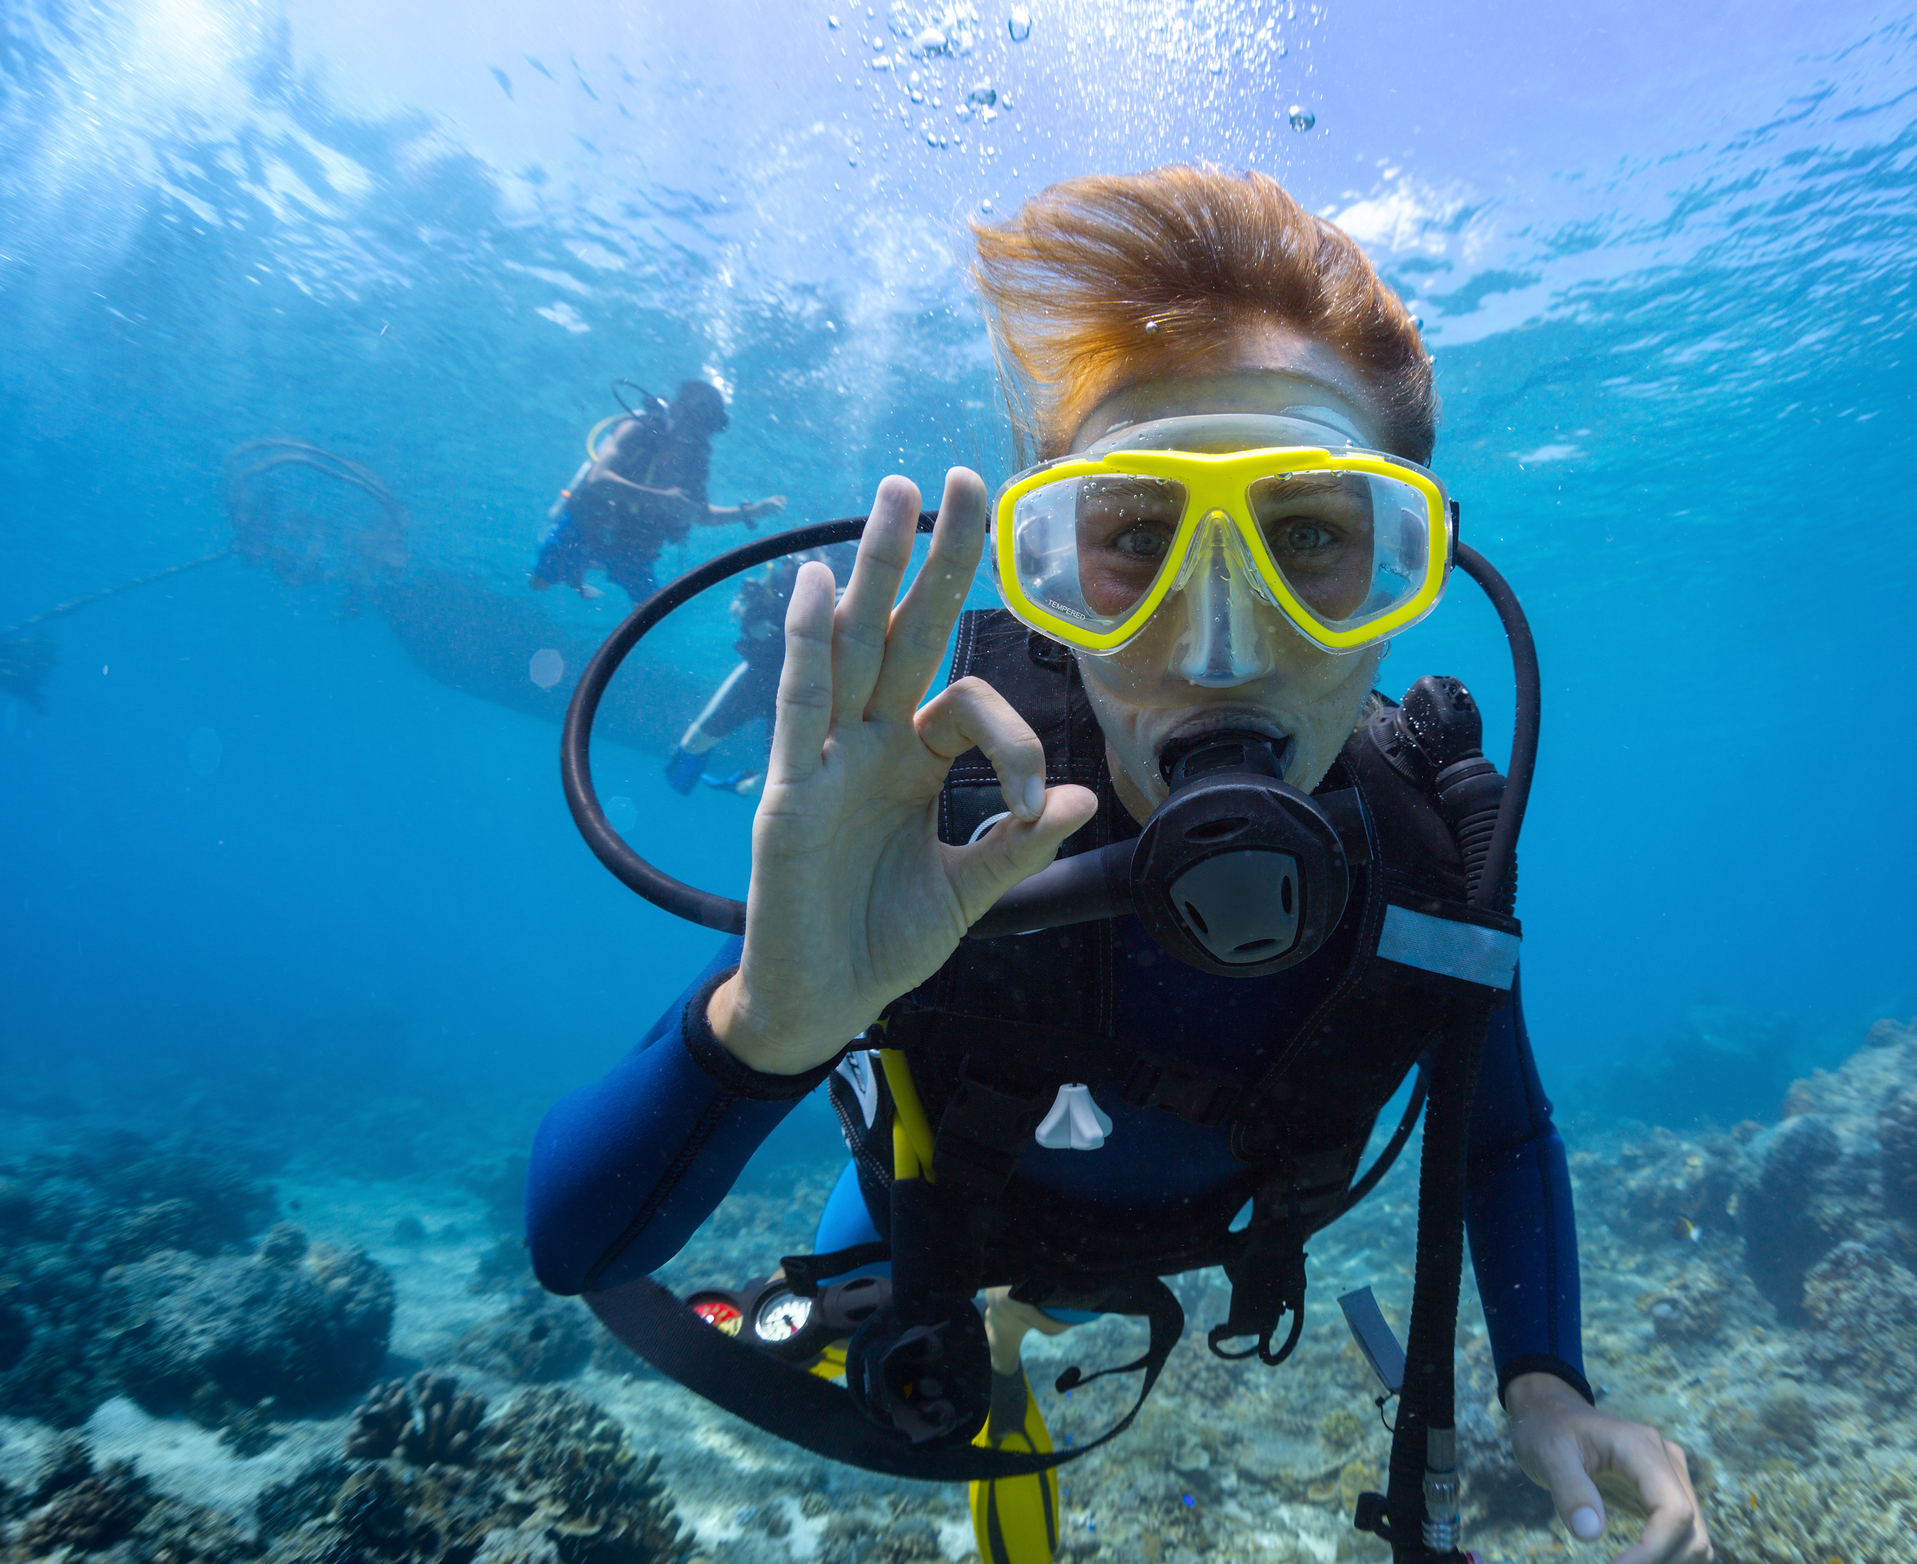 Scuba Diver underwater giving the OK sign